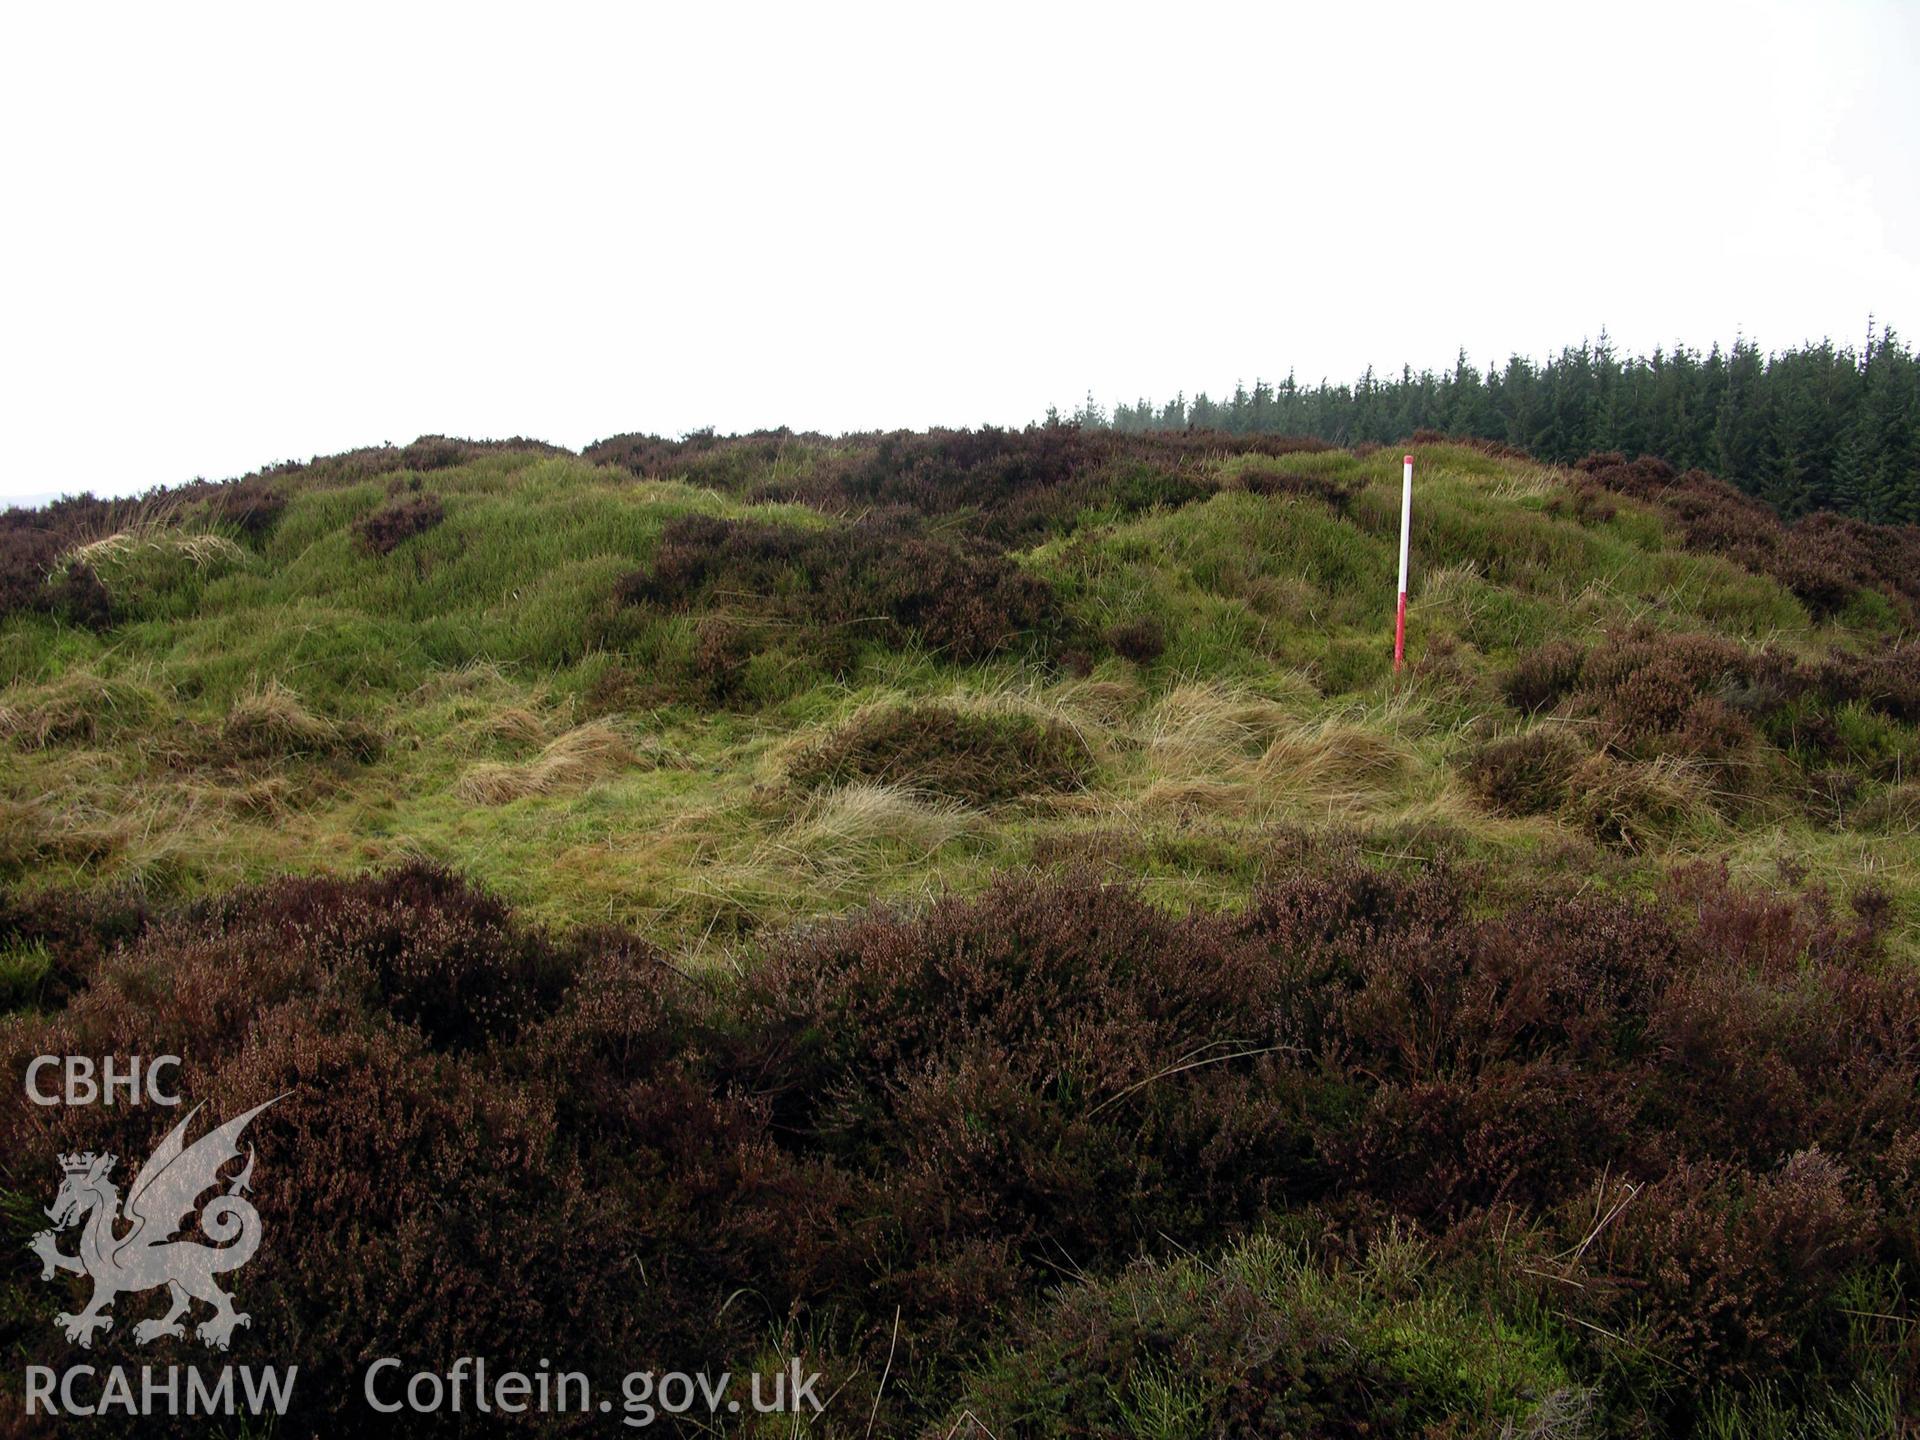 Colour digital photograph showing view of Blaen y Cwm Ring Cairn Mg 279 - part of archaeological desk based assessment for Esgair Cwmowen, Carno (CAP Report 549).